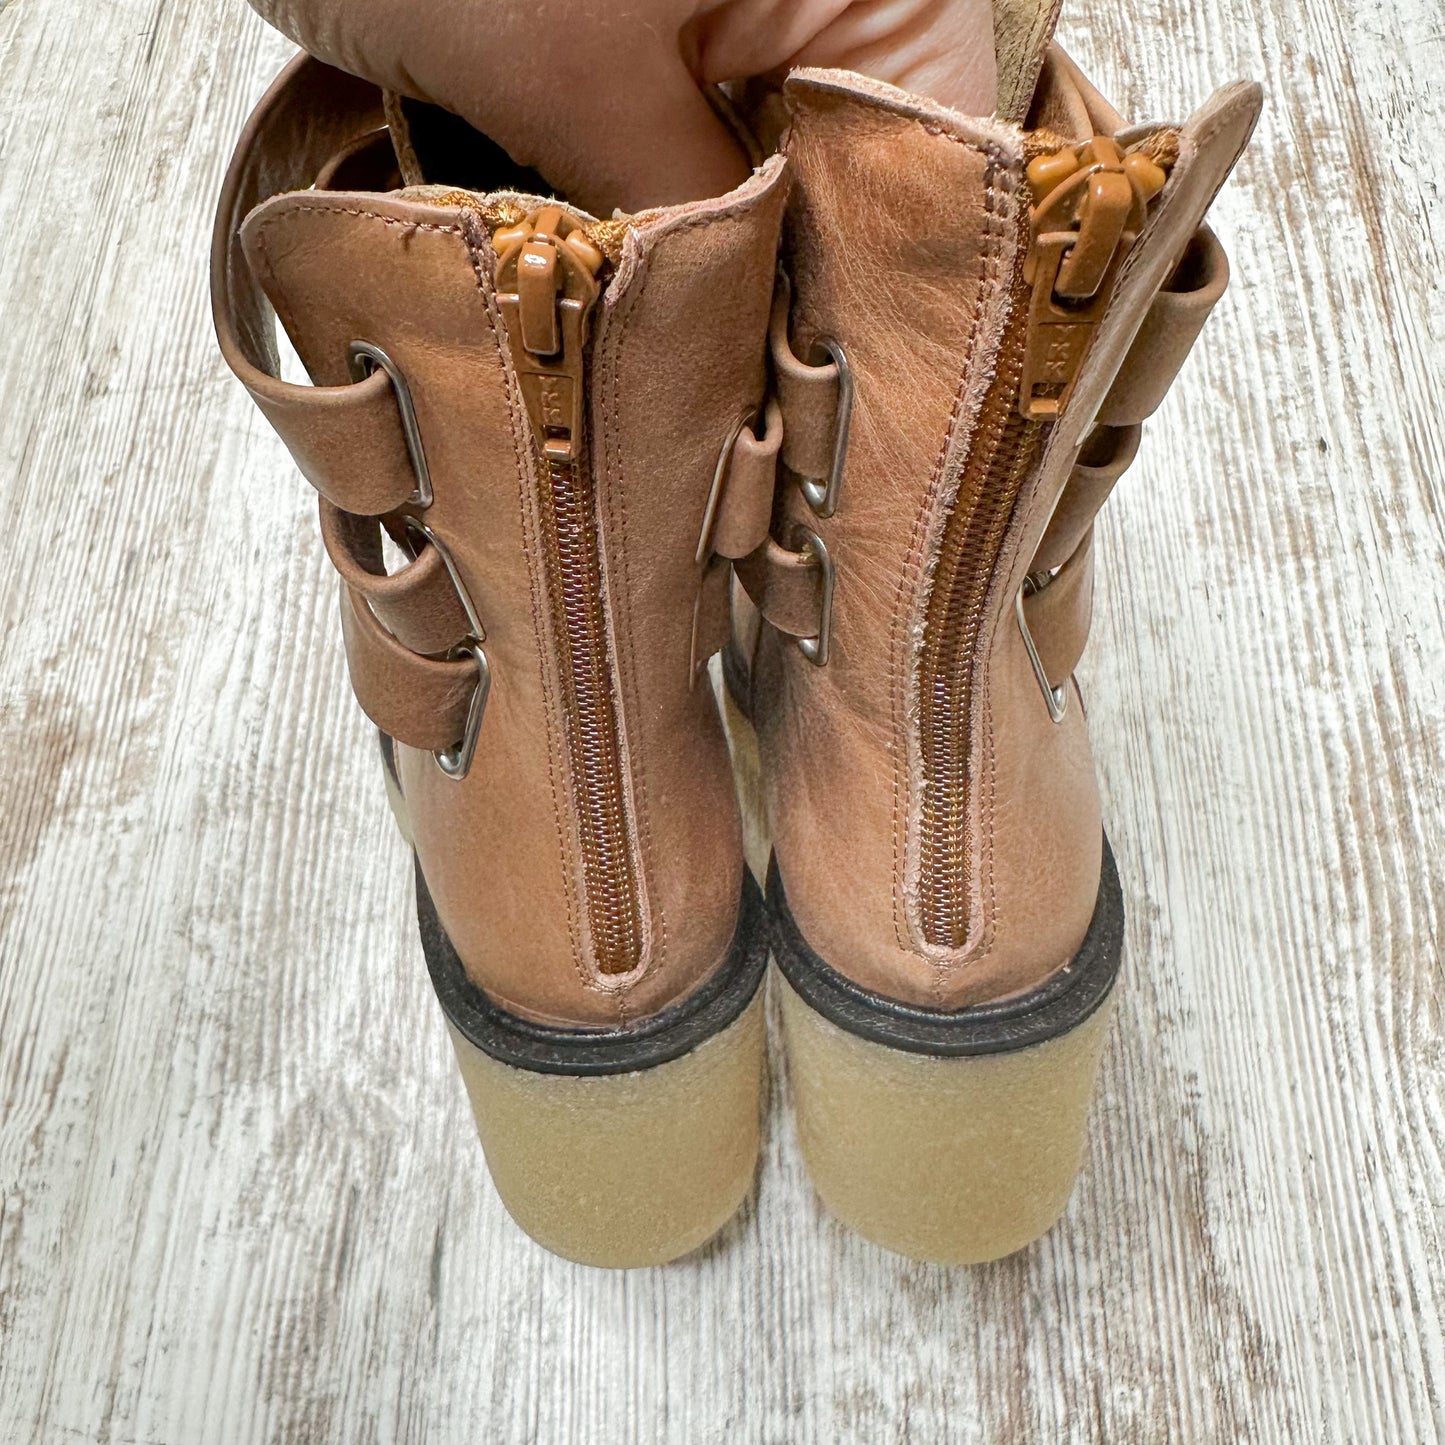 Free People Jesse Cut Out Boots in English Tan Size EU 36 - US 6